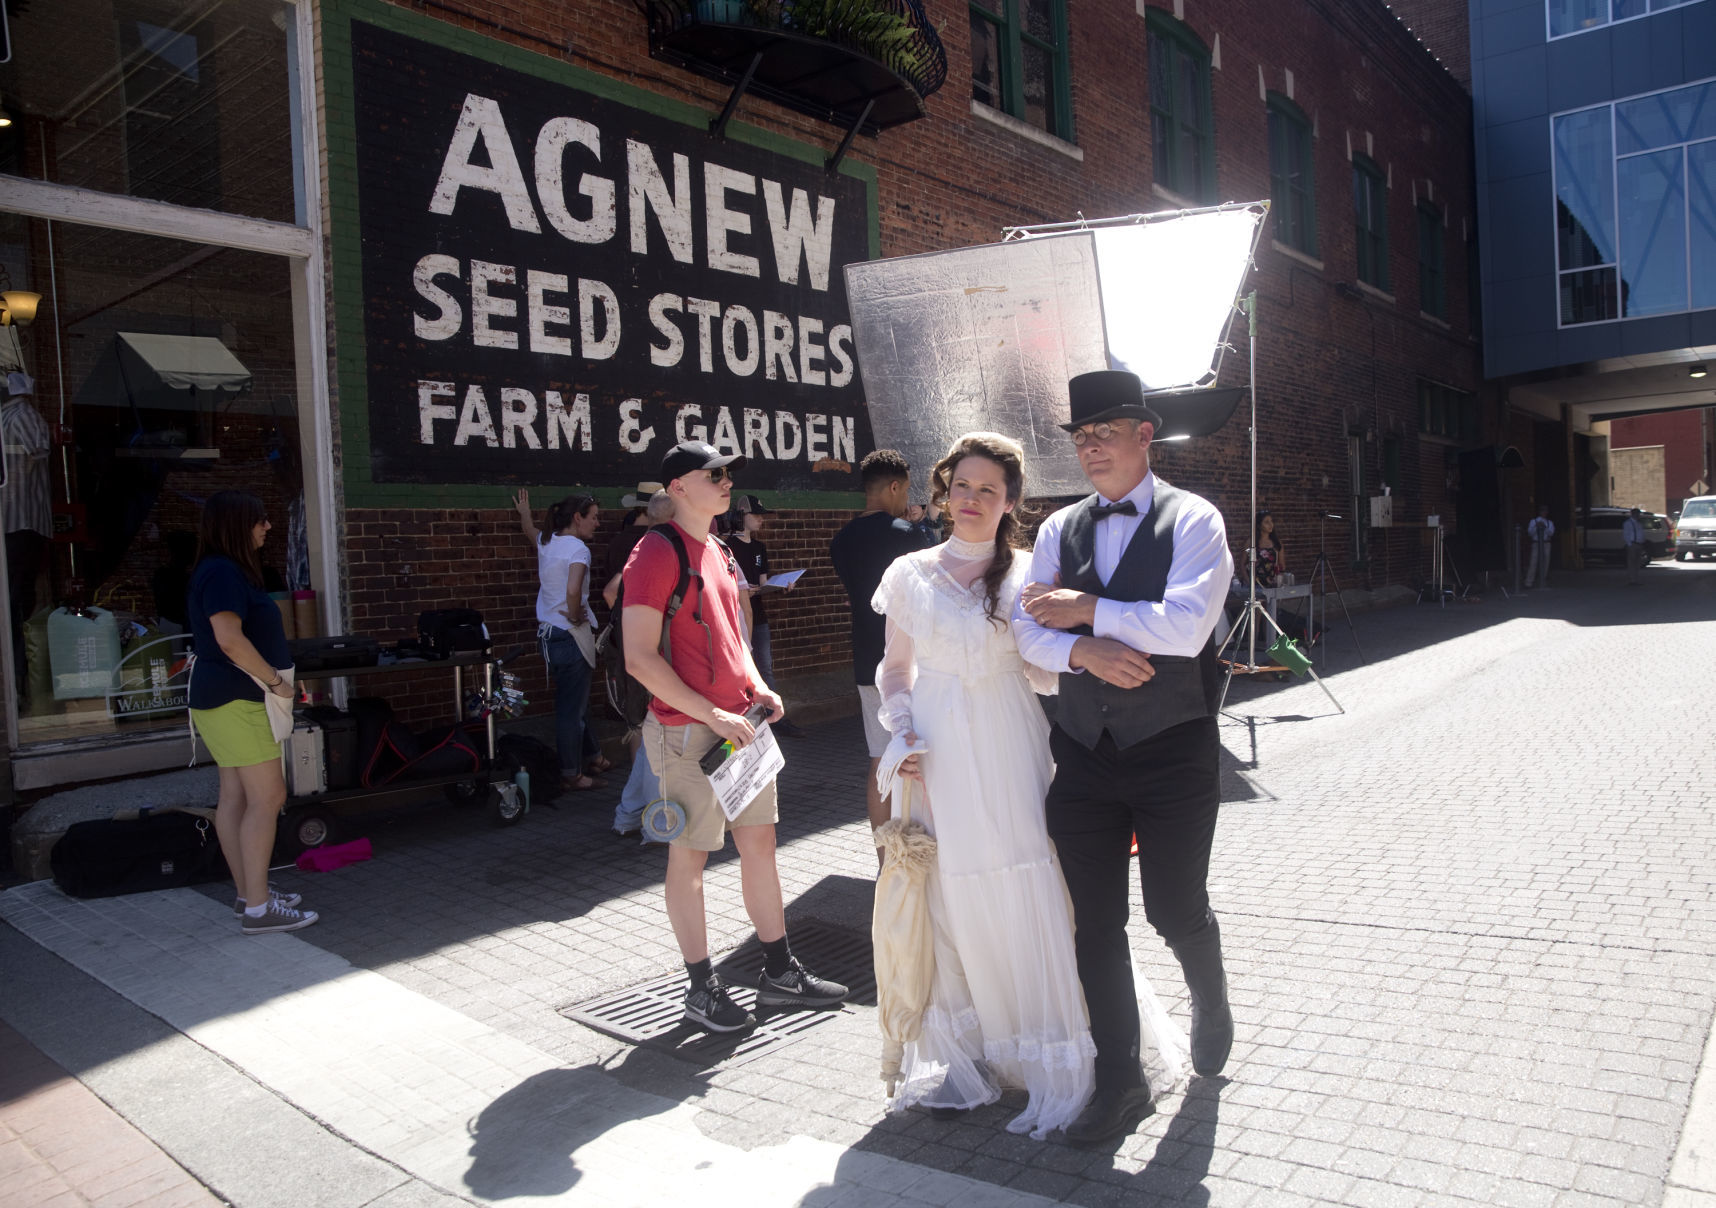 Students film period piece in downtown Roanoke image